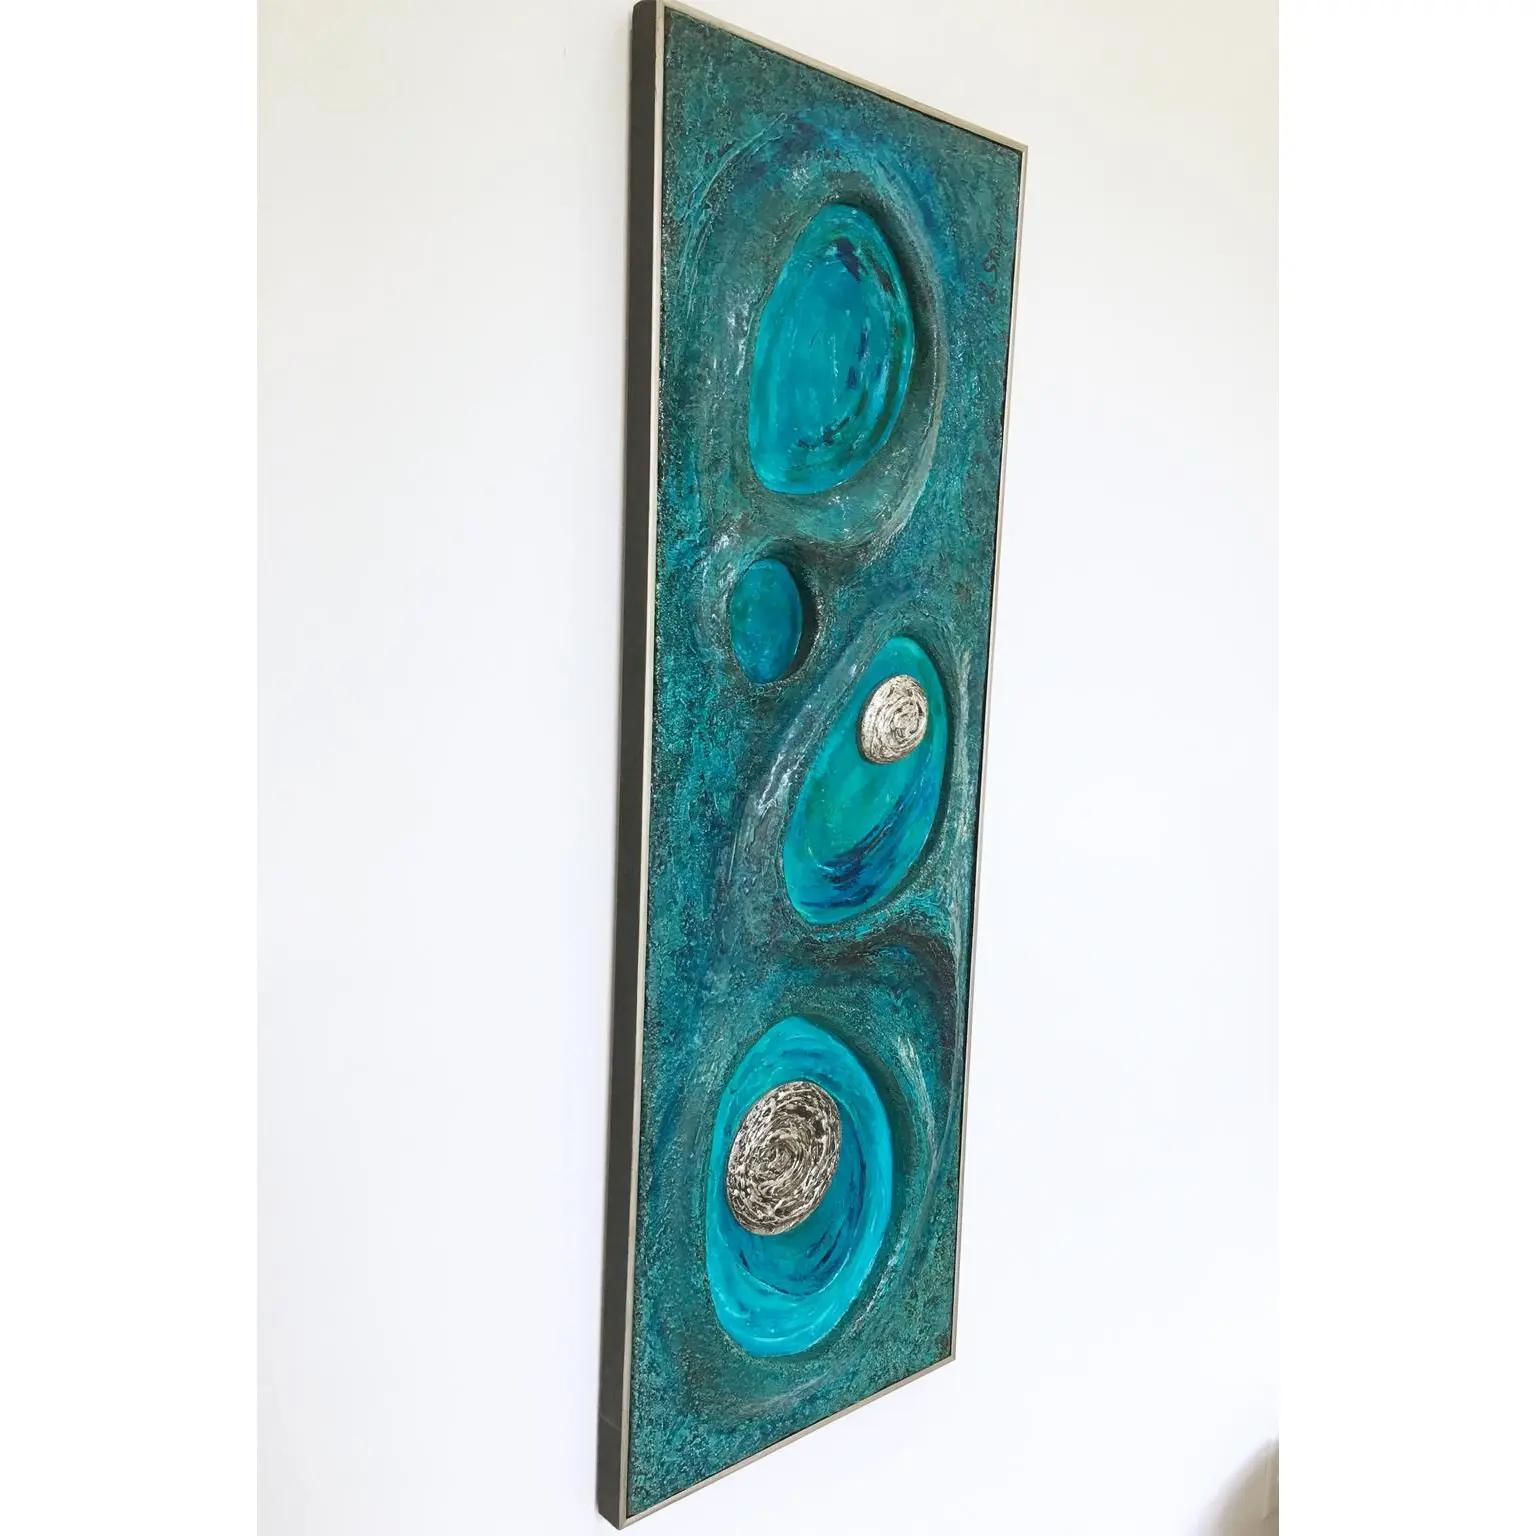 Lorraine Stelzer Turquoise Acrylic Resin Psychedelic Art Wall Sculpture Panel For Sale 8